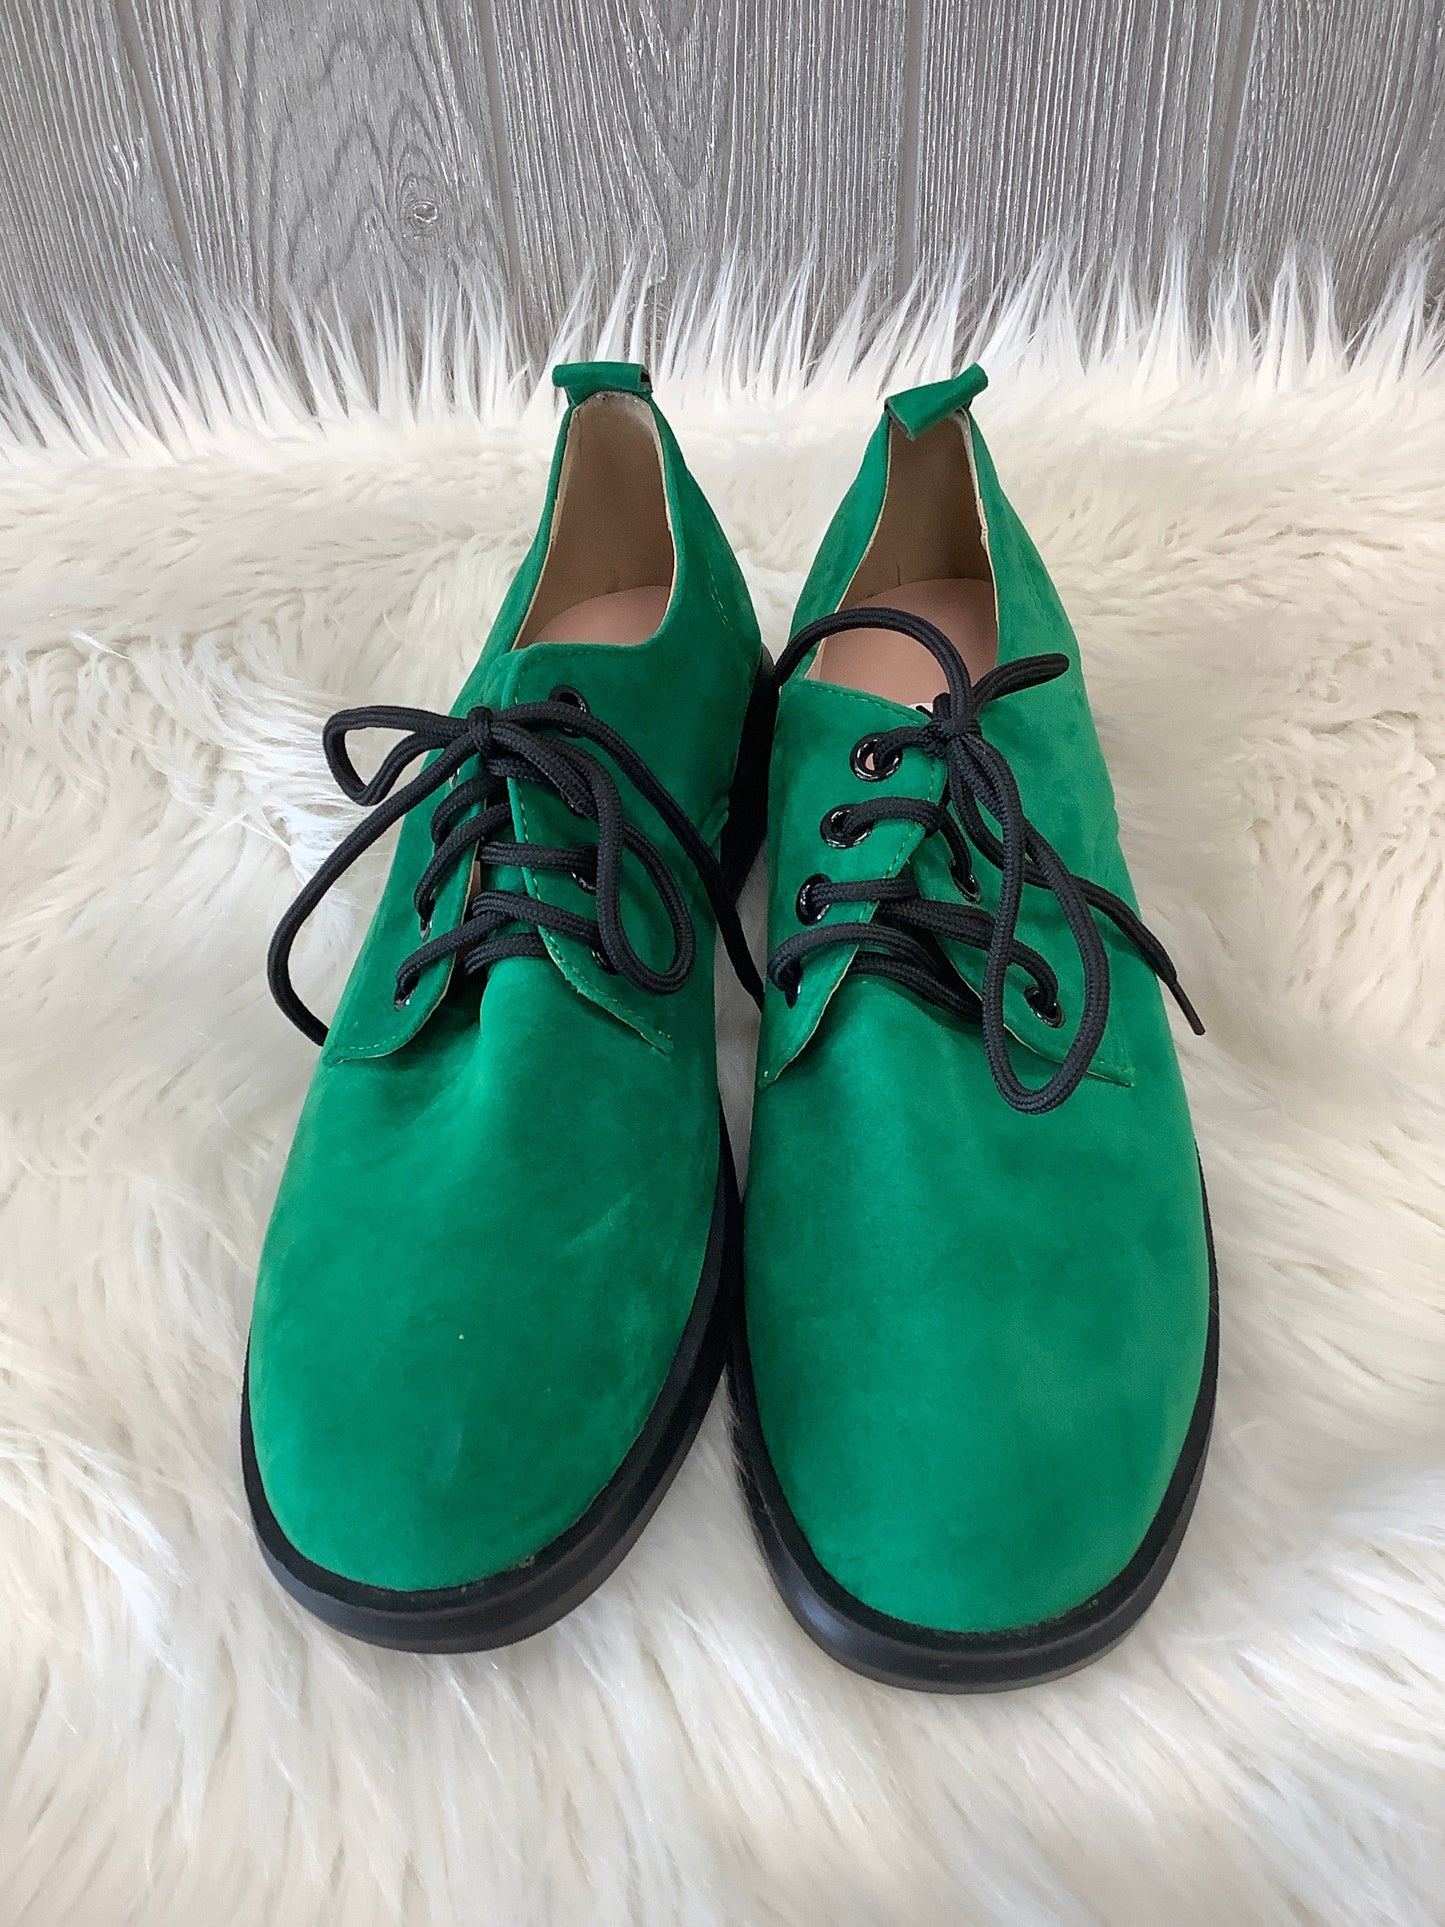 Green Shoes Flats Clothes Mentor, Size 10